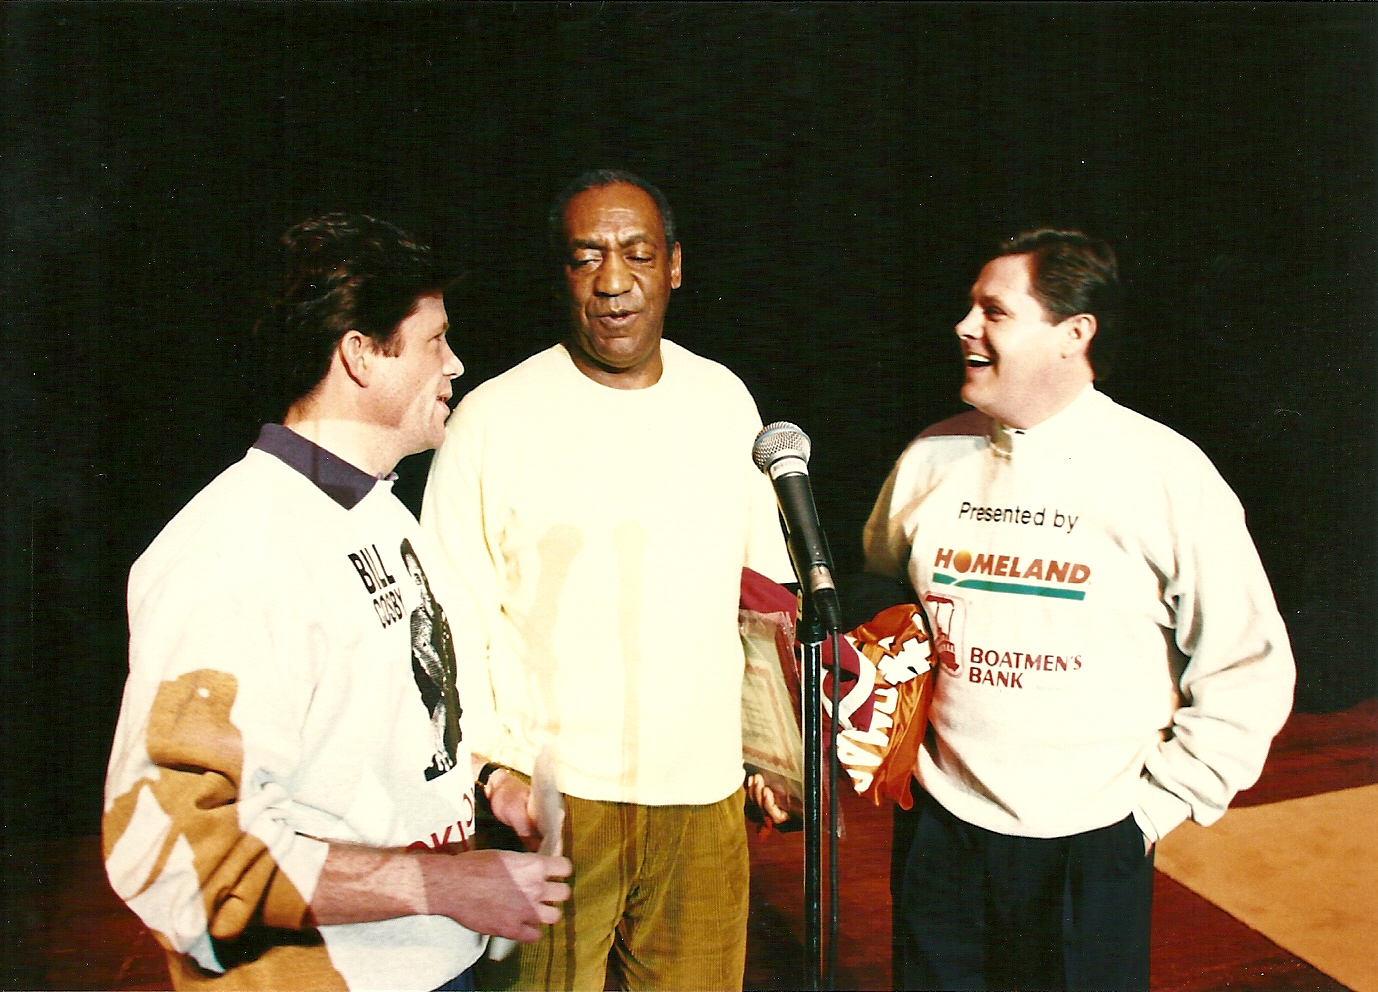 Ben McCain and Butch McCain on stage with Bill Cosby in Oklahoma City.